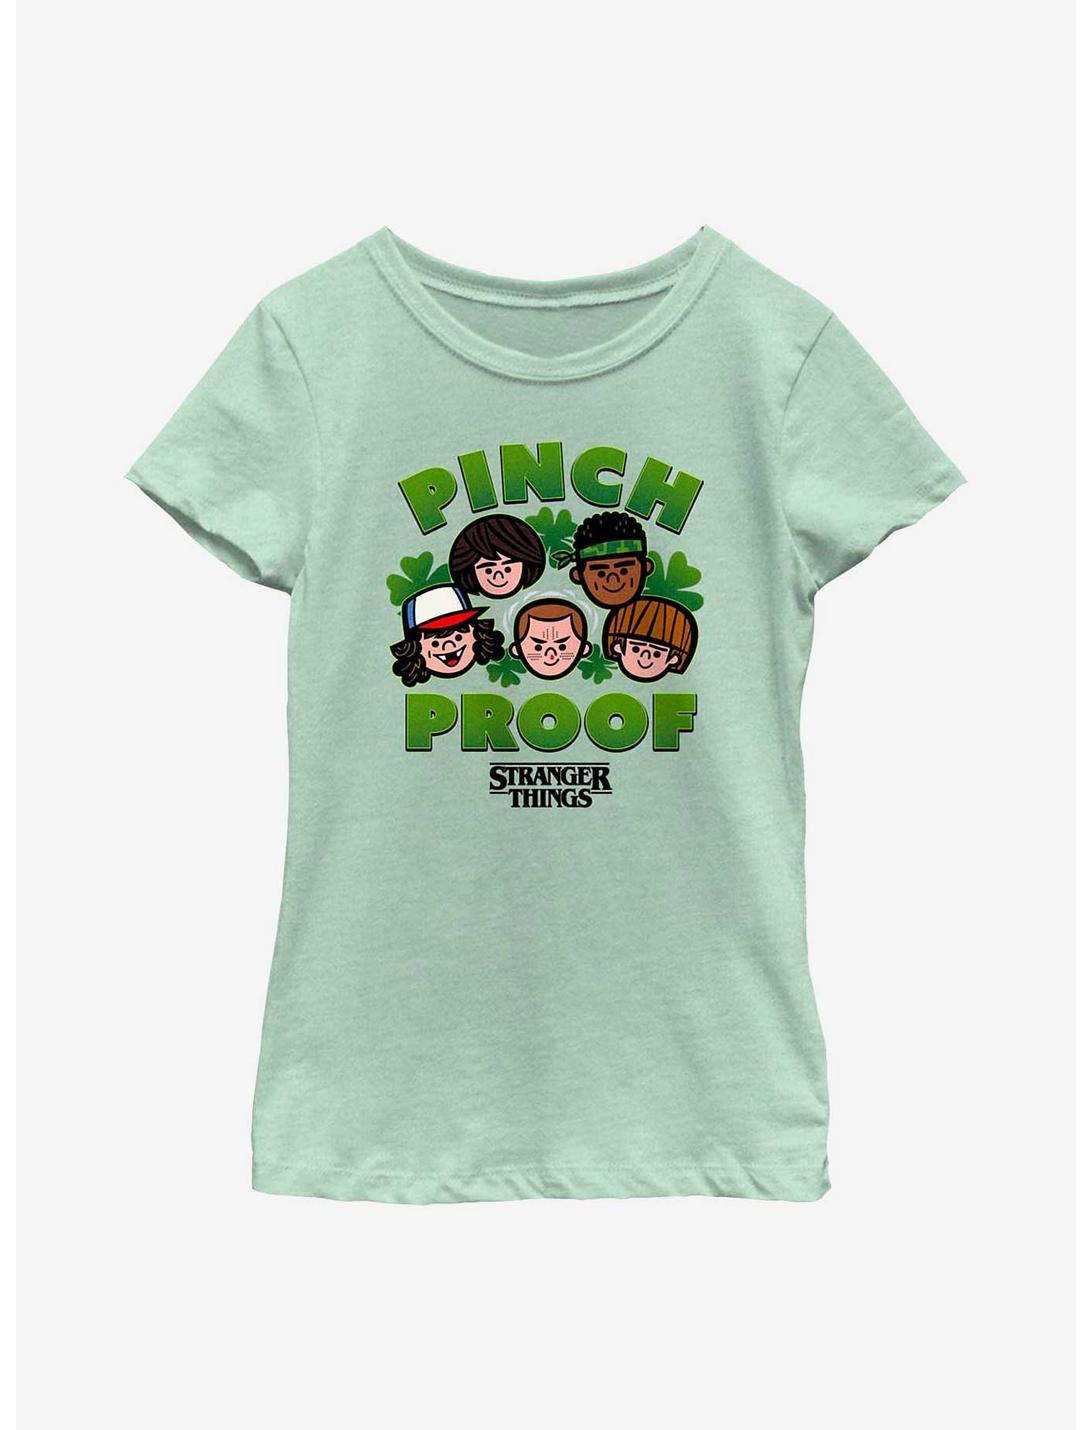 Stranger Things Pinch Proof Youth Girls T-Shirt, MINT, hi-res